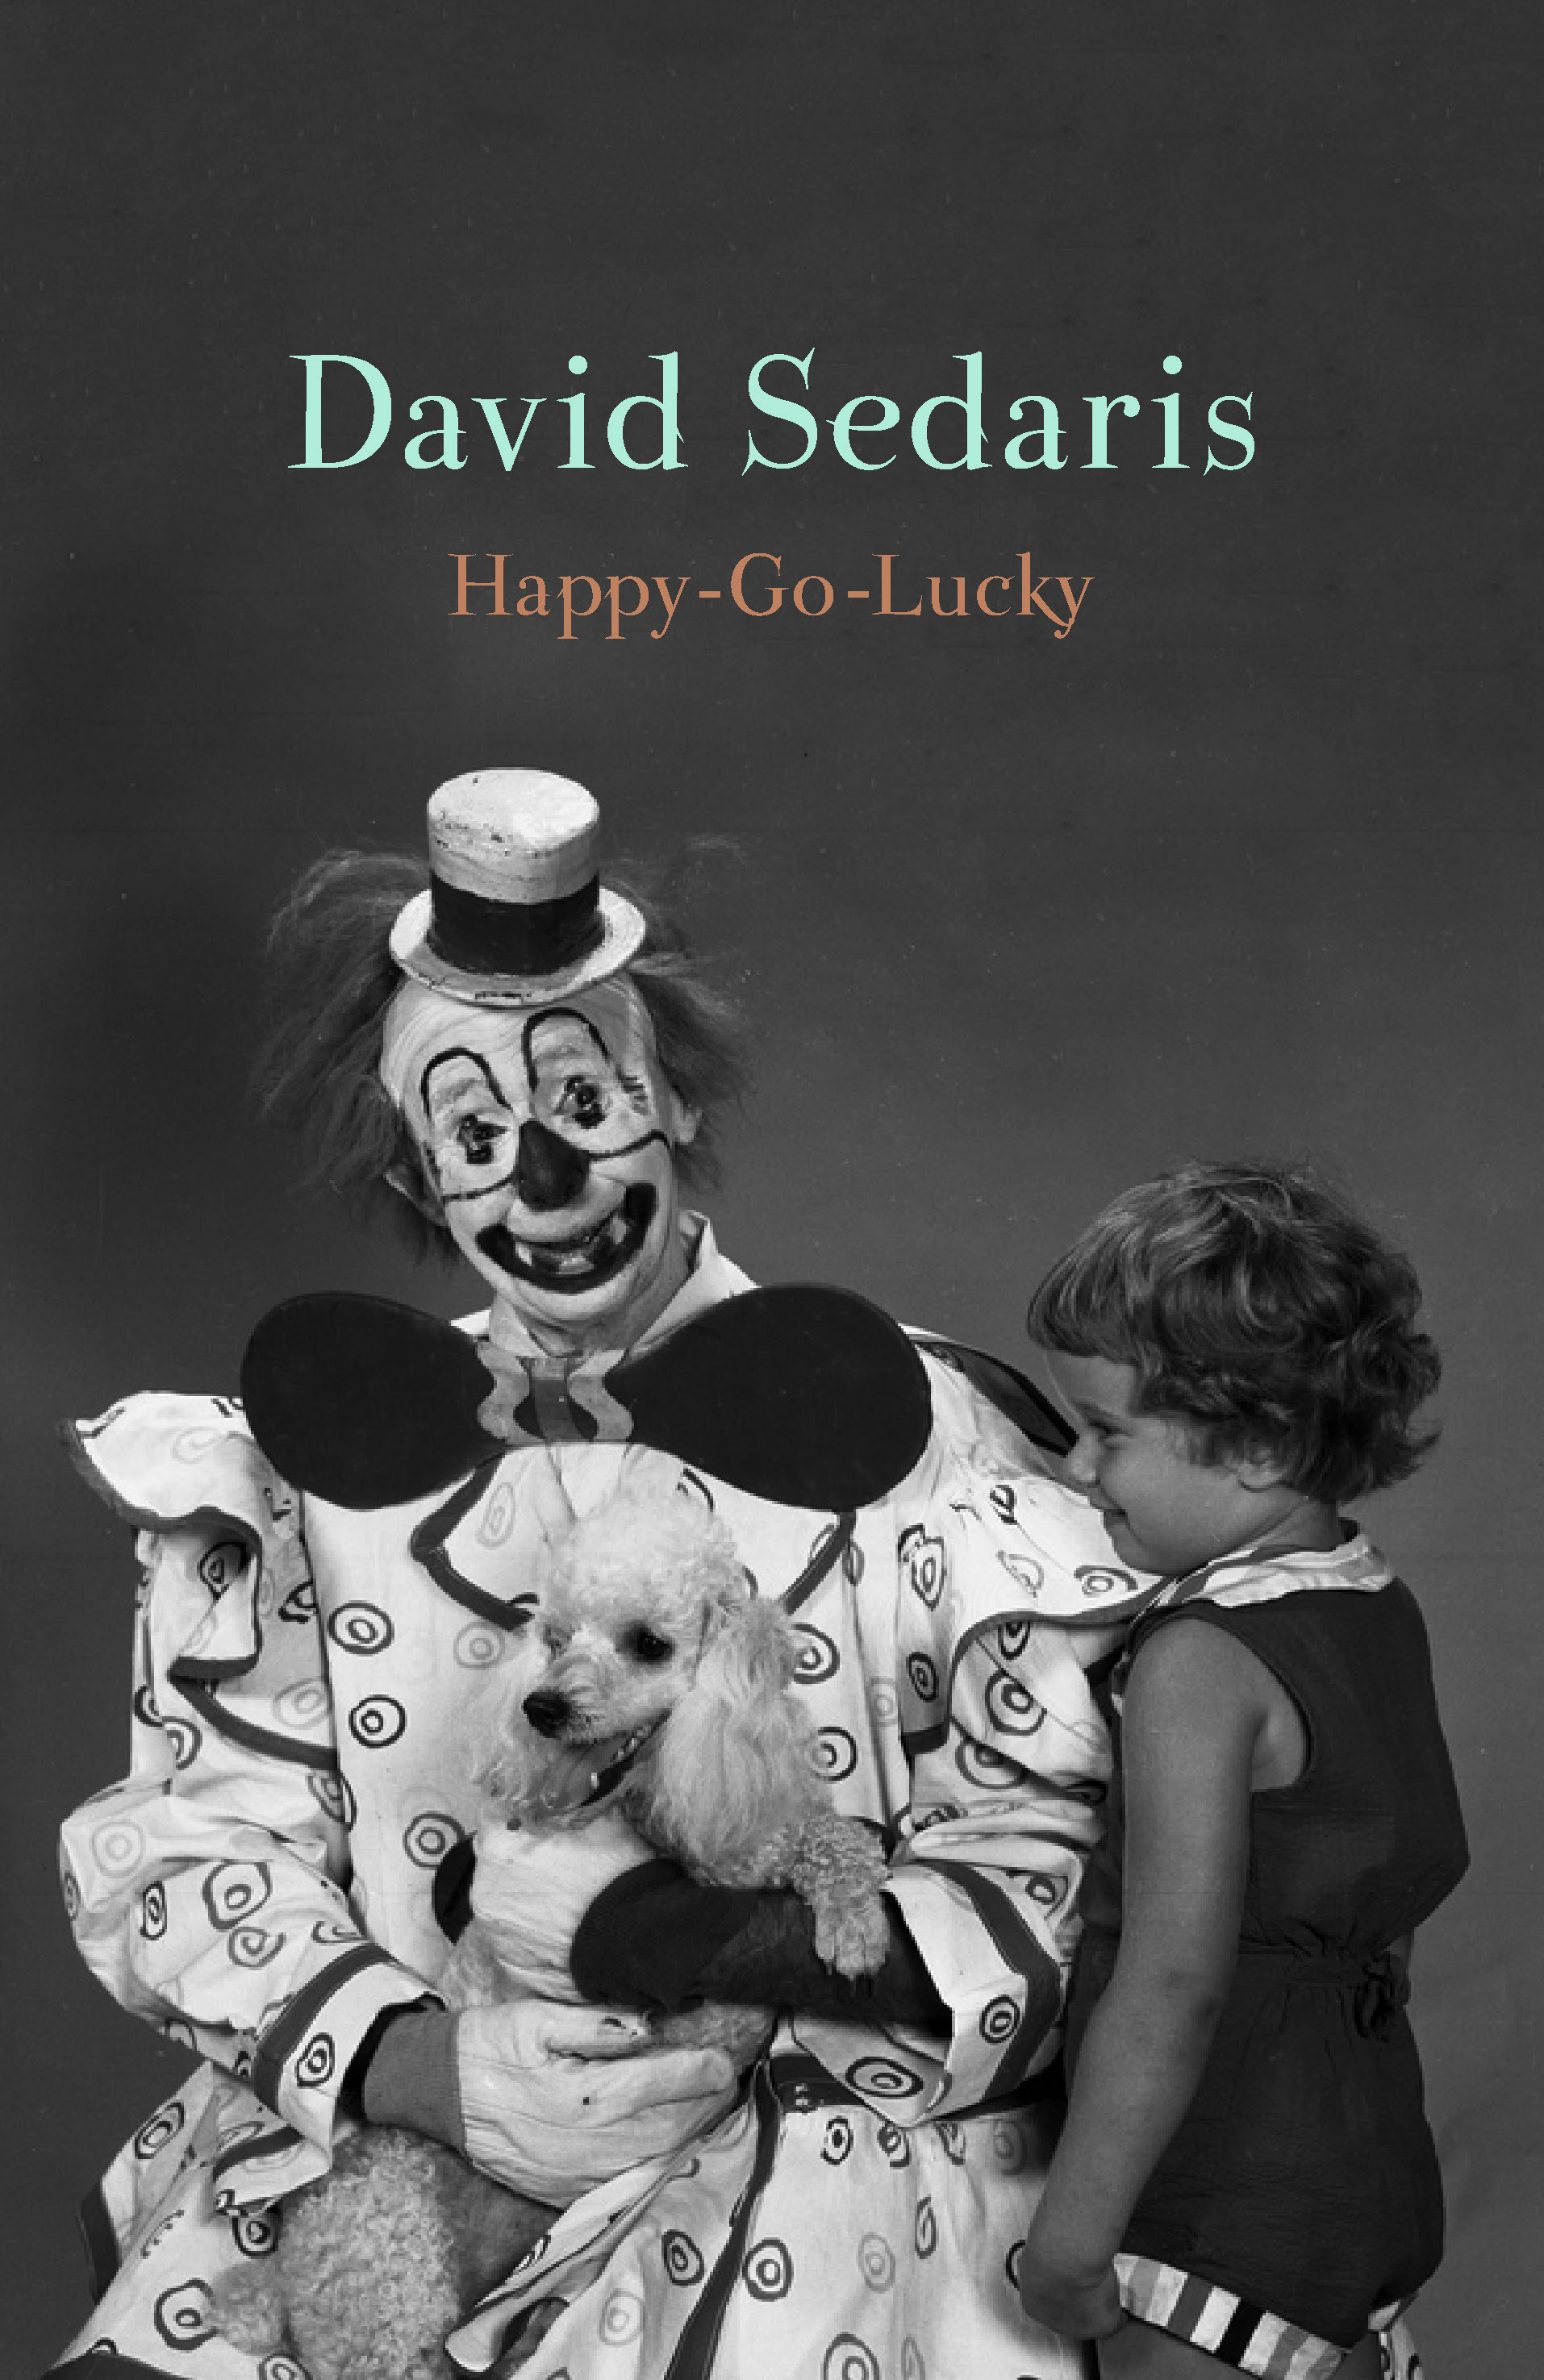 David Sedaris' book cover "Happy Go Lucky". A black and white photo of a traditional clown holding a poodle with a toddle standing off to the side looking at the dog. 